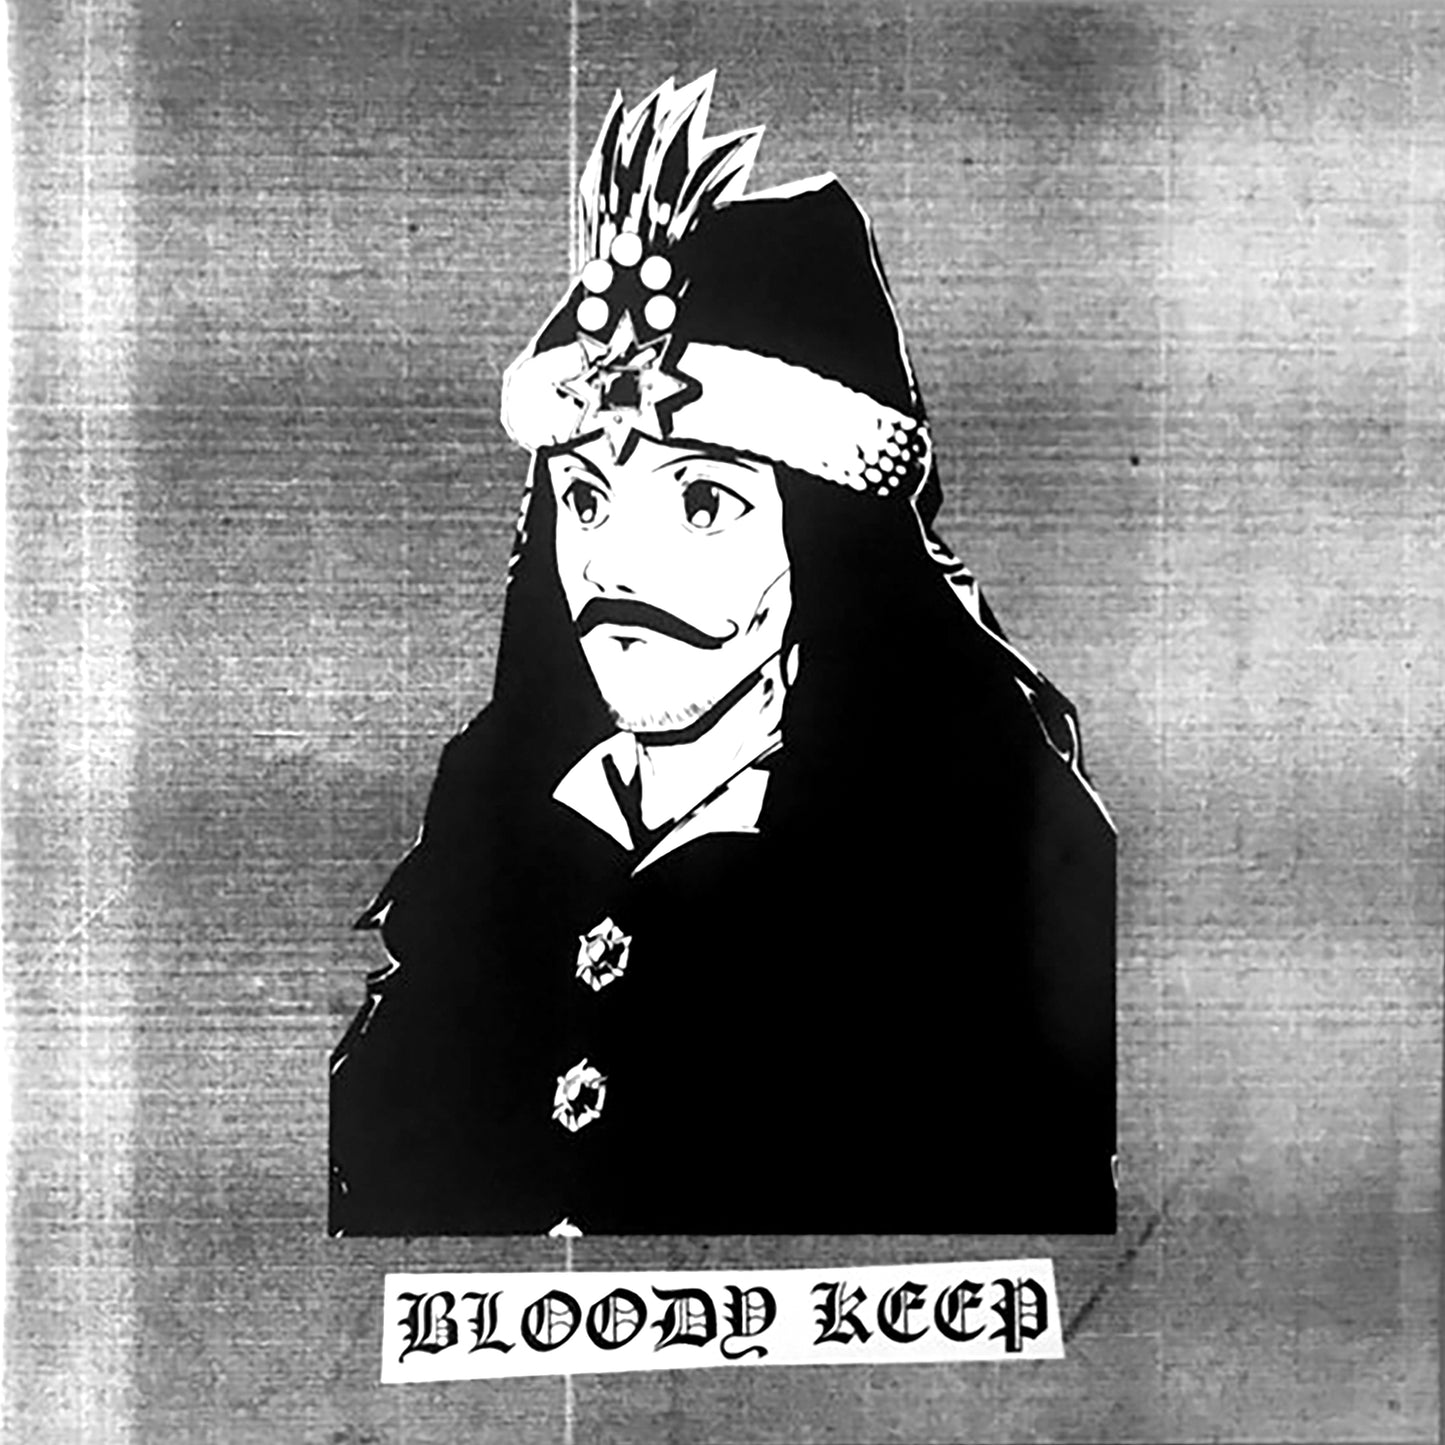 Bloody Keep - Bloody Horror / Cup Of Blood In The Top Of The Tower